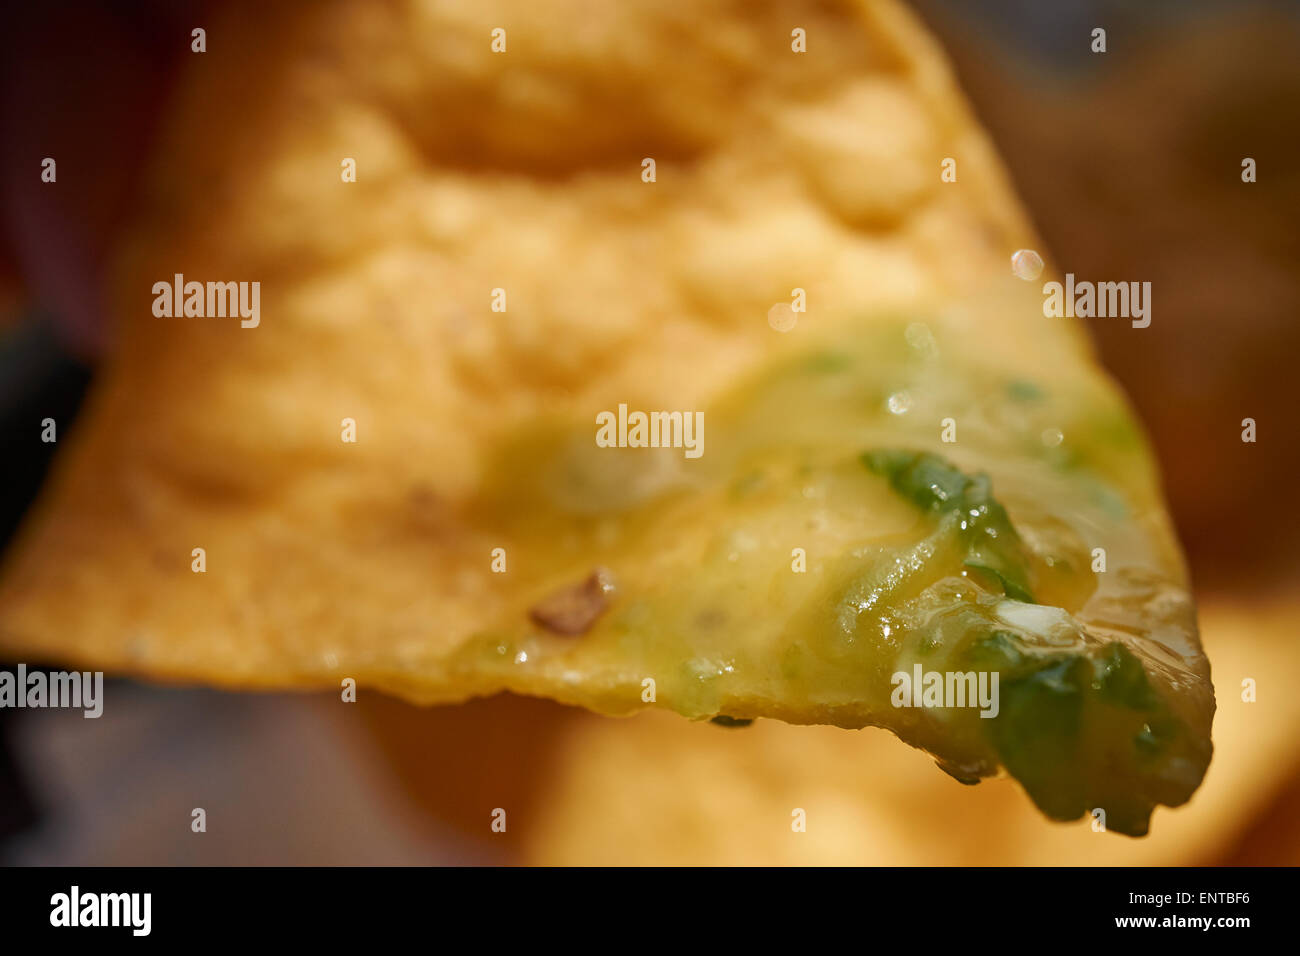 Tortilla chip with green salsa, typical American Mexican Restaurant item Stock Photo